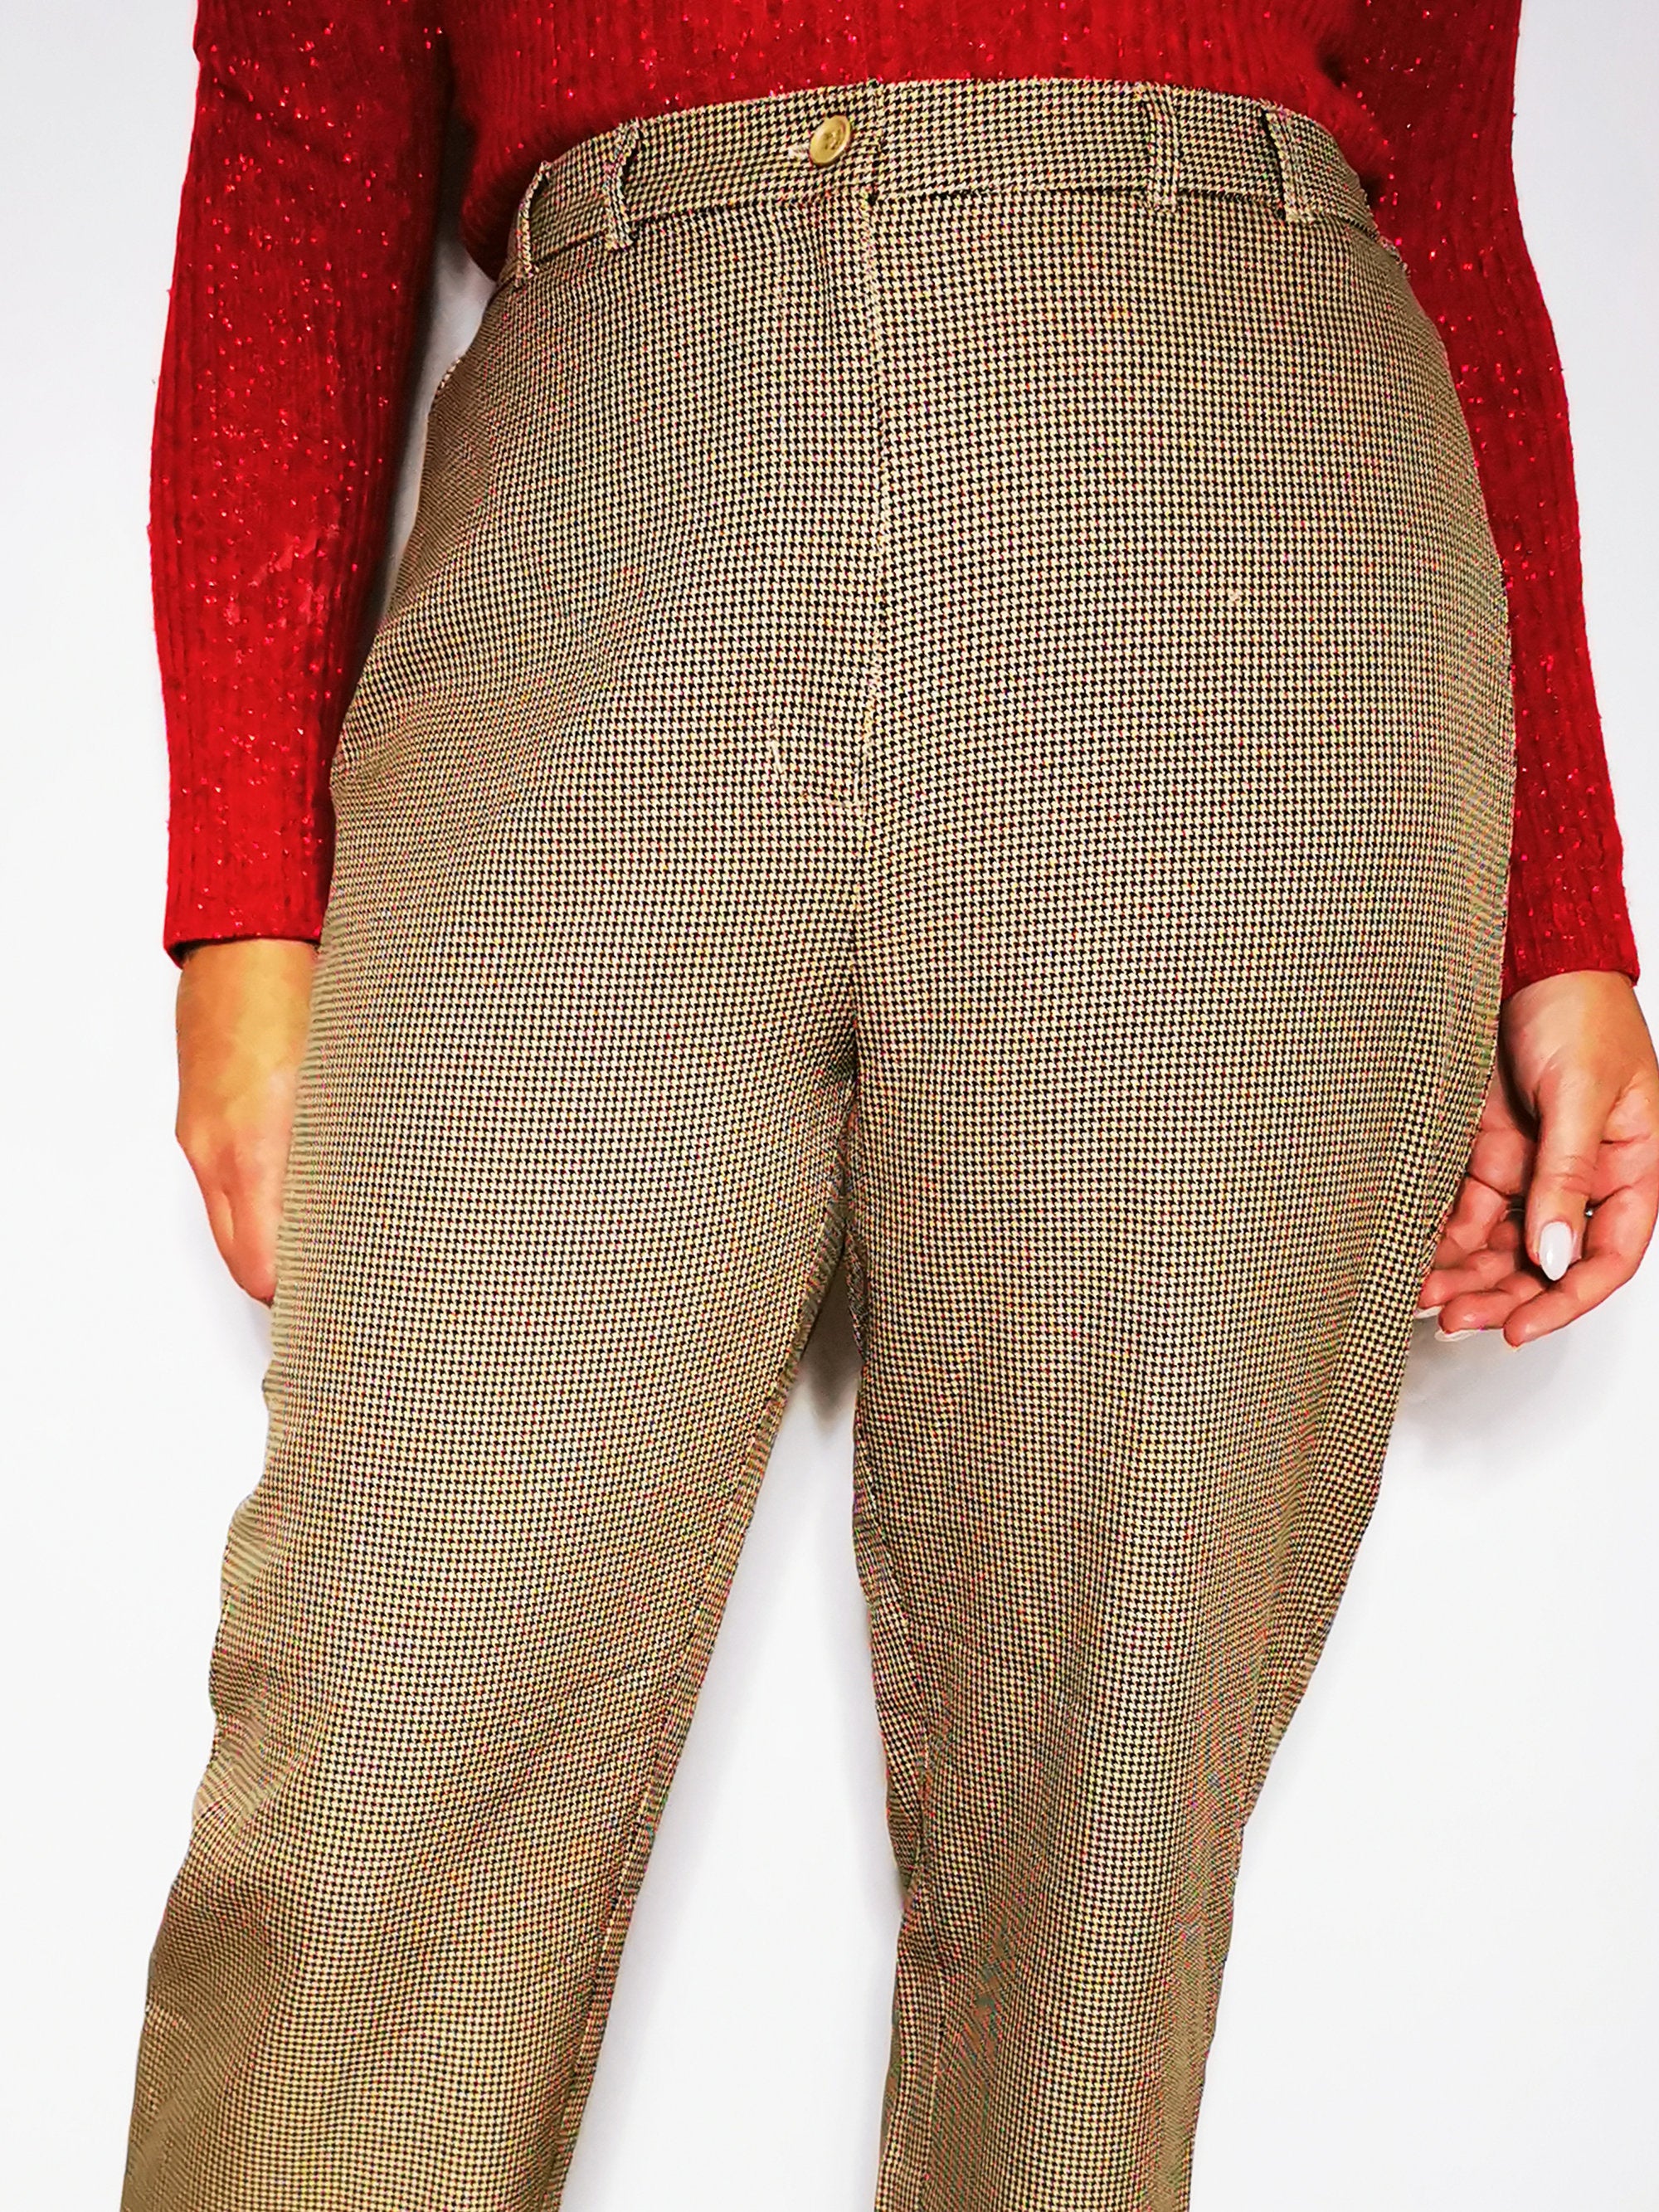 Vintage 90s dogtooth pattern smart casual straight pants